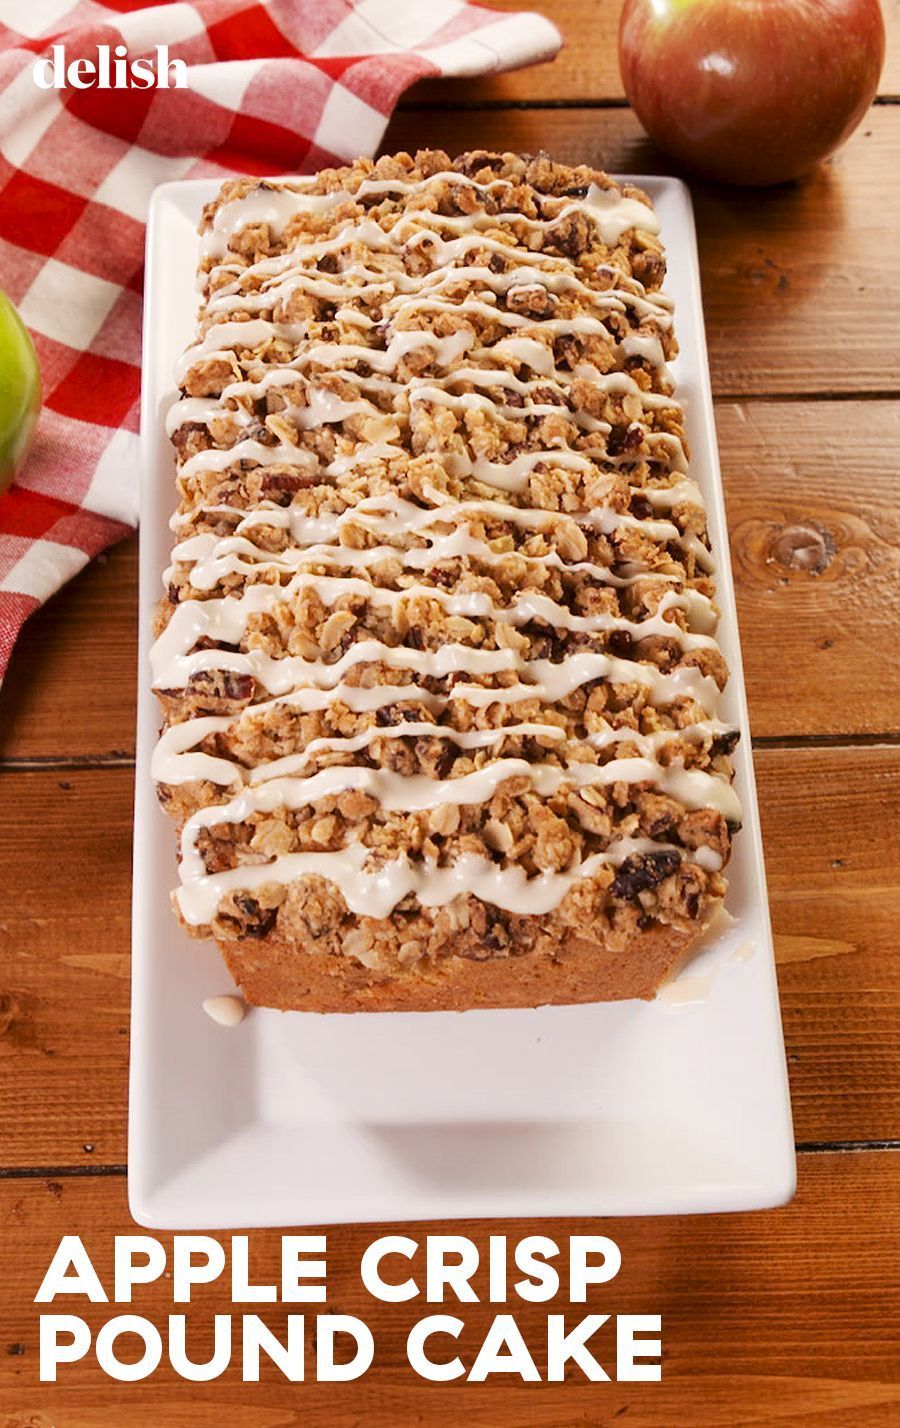 Apple Crisp Pound Cake Has An Irresistible Crumb Topping -   19 cake Apple sweets ideas